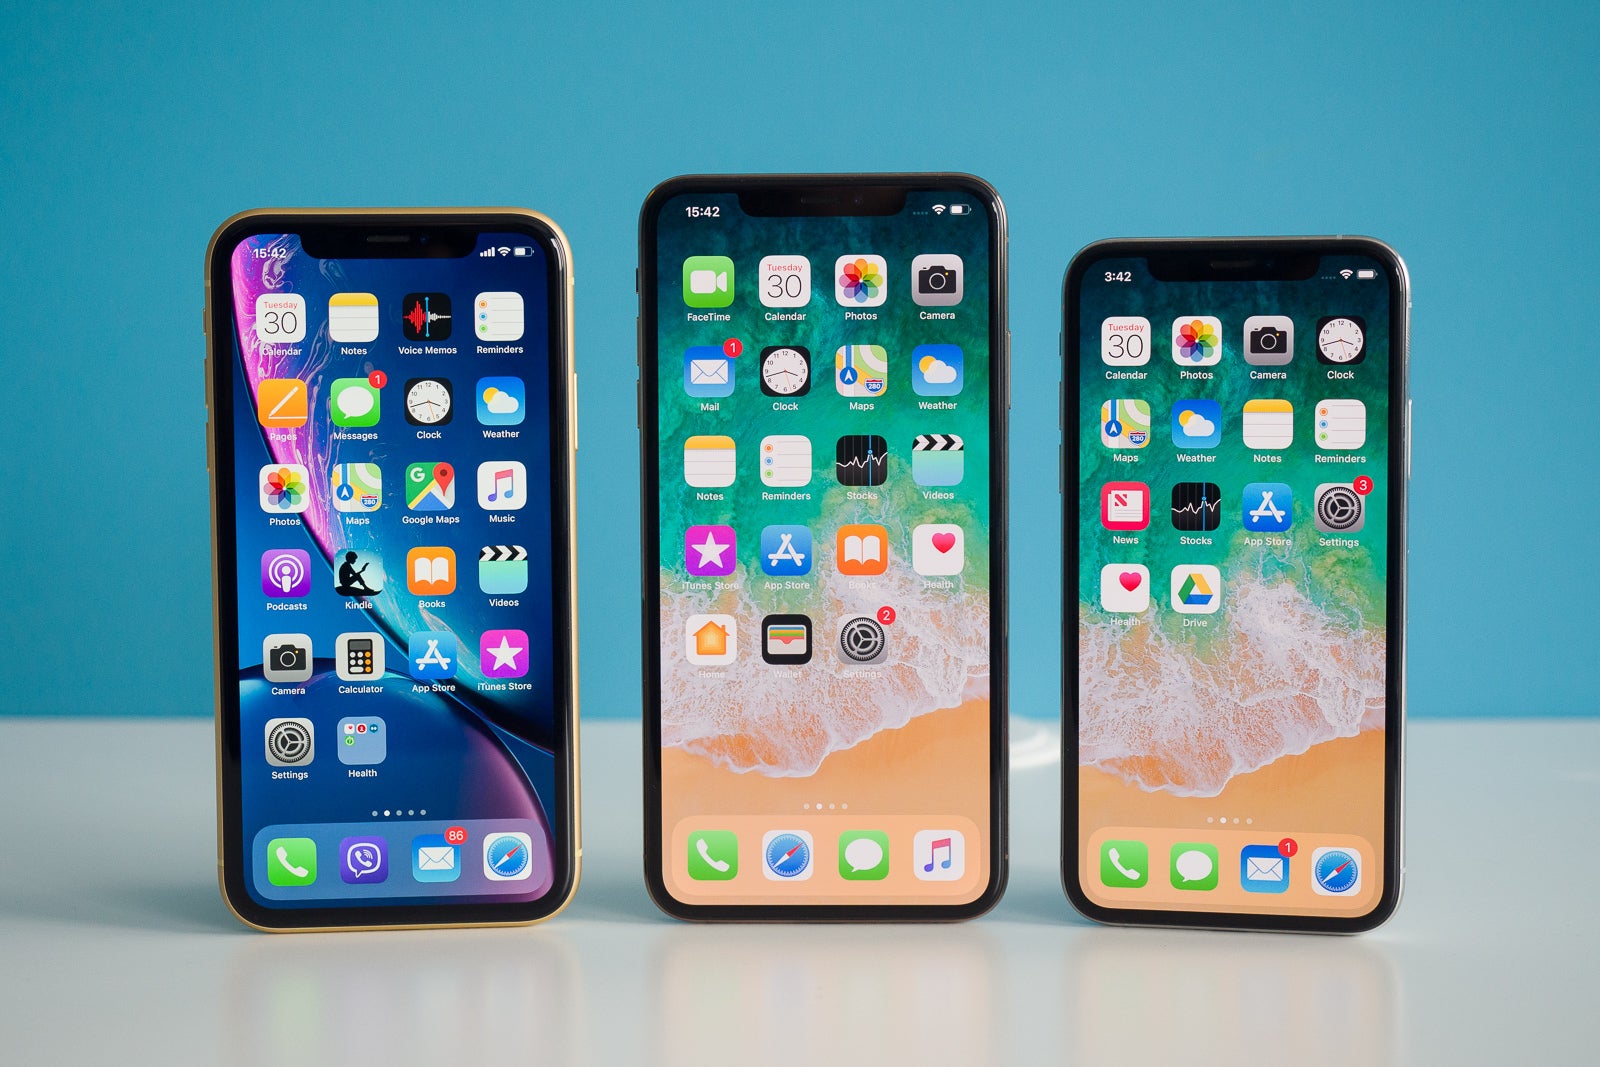 Apple is ditching the iPhone XS &amp;amp; iPhone XR LCP technology almost entirely - 2019 iPhones to feature new antenna structure that improves indoor navigation